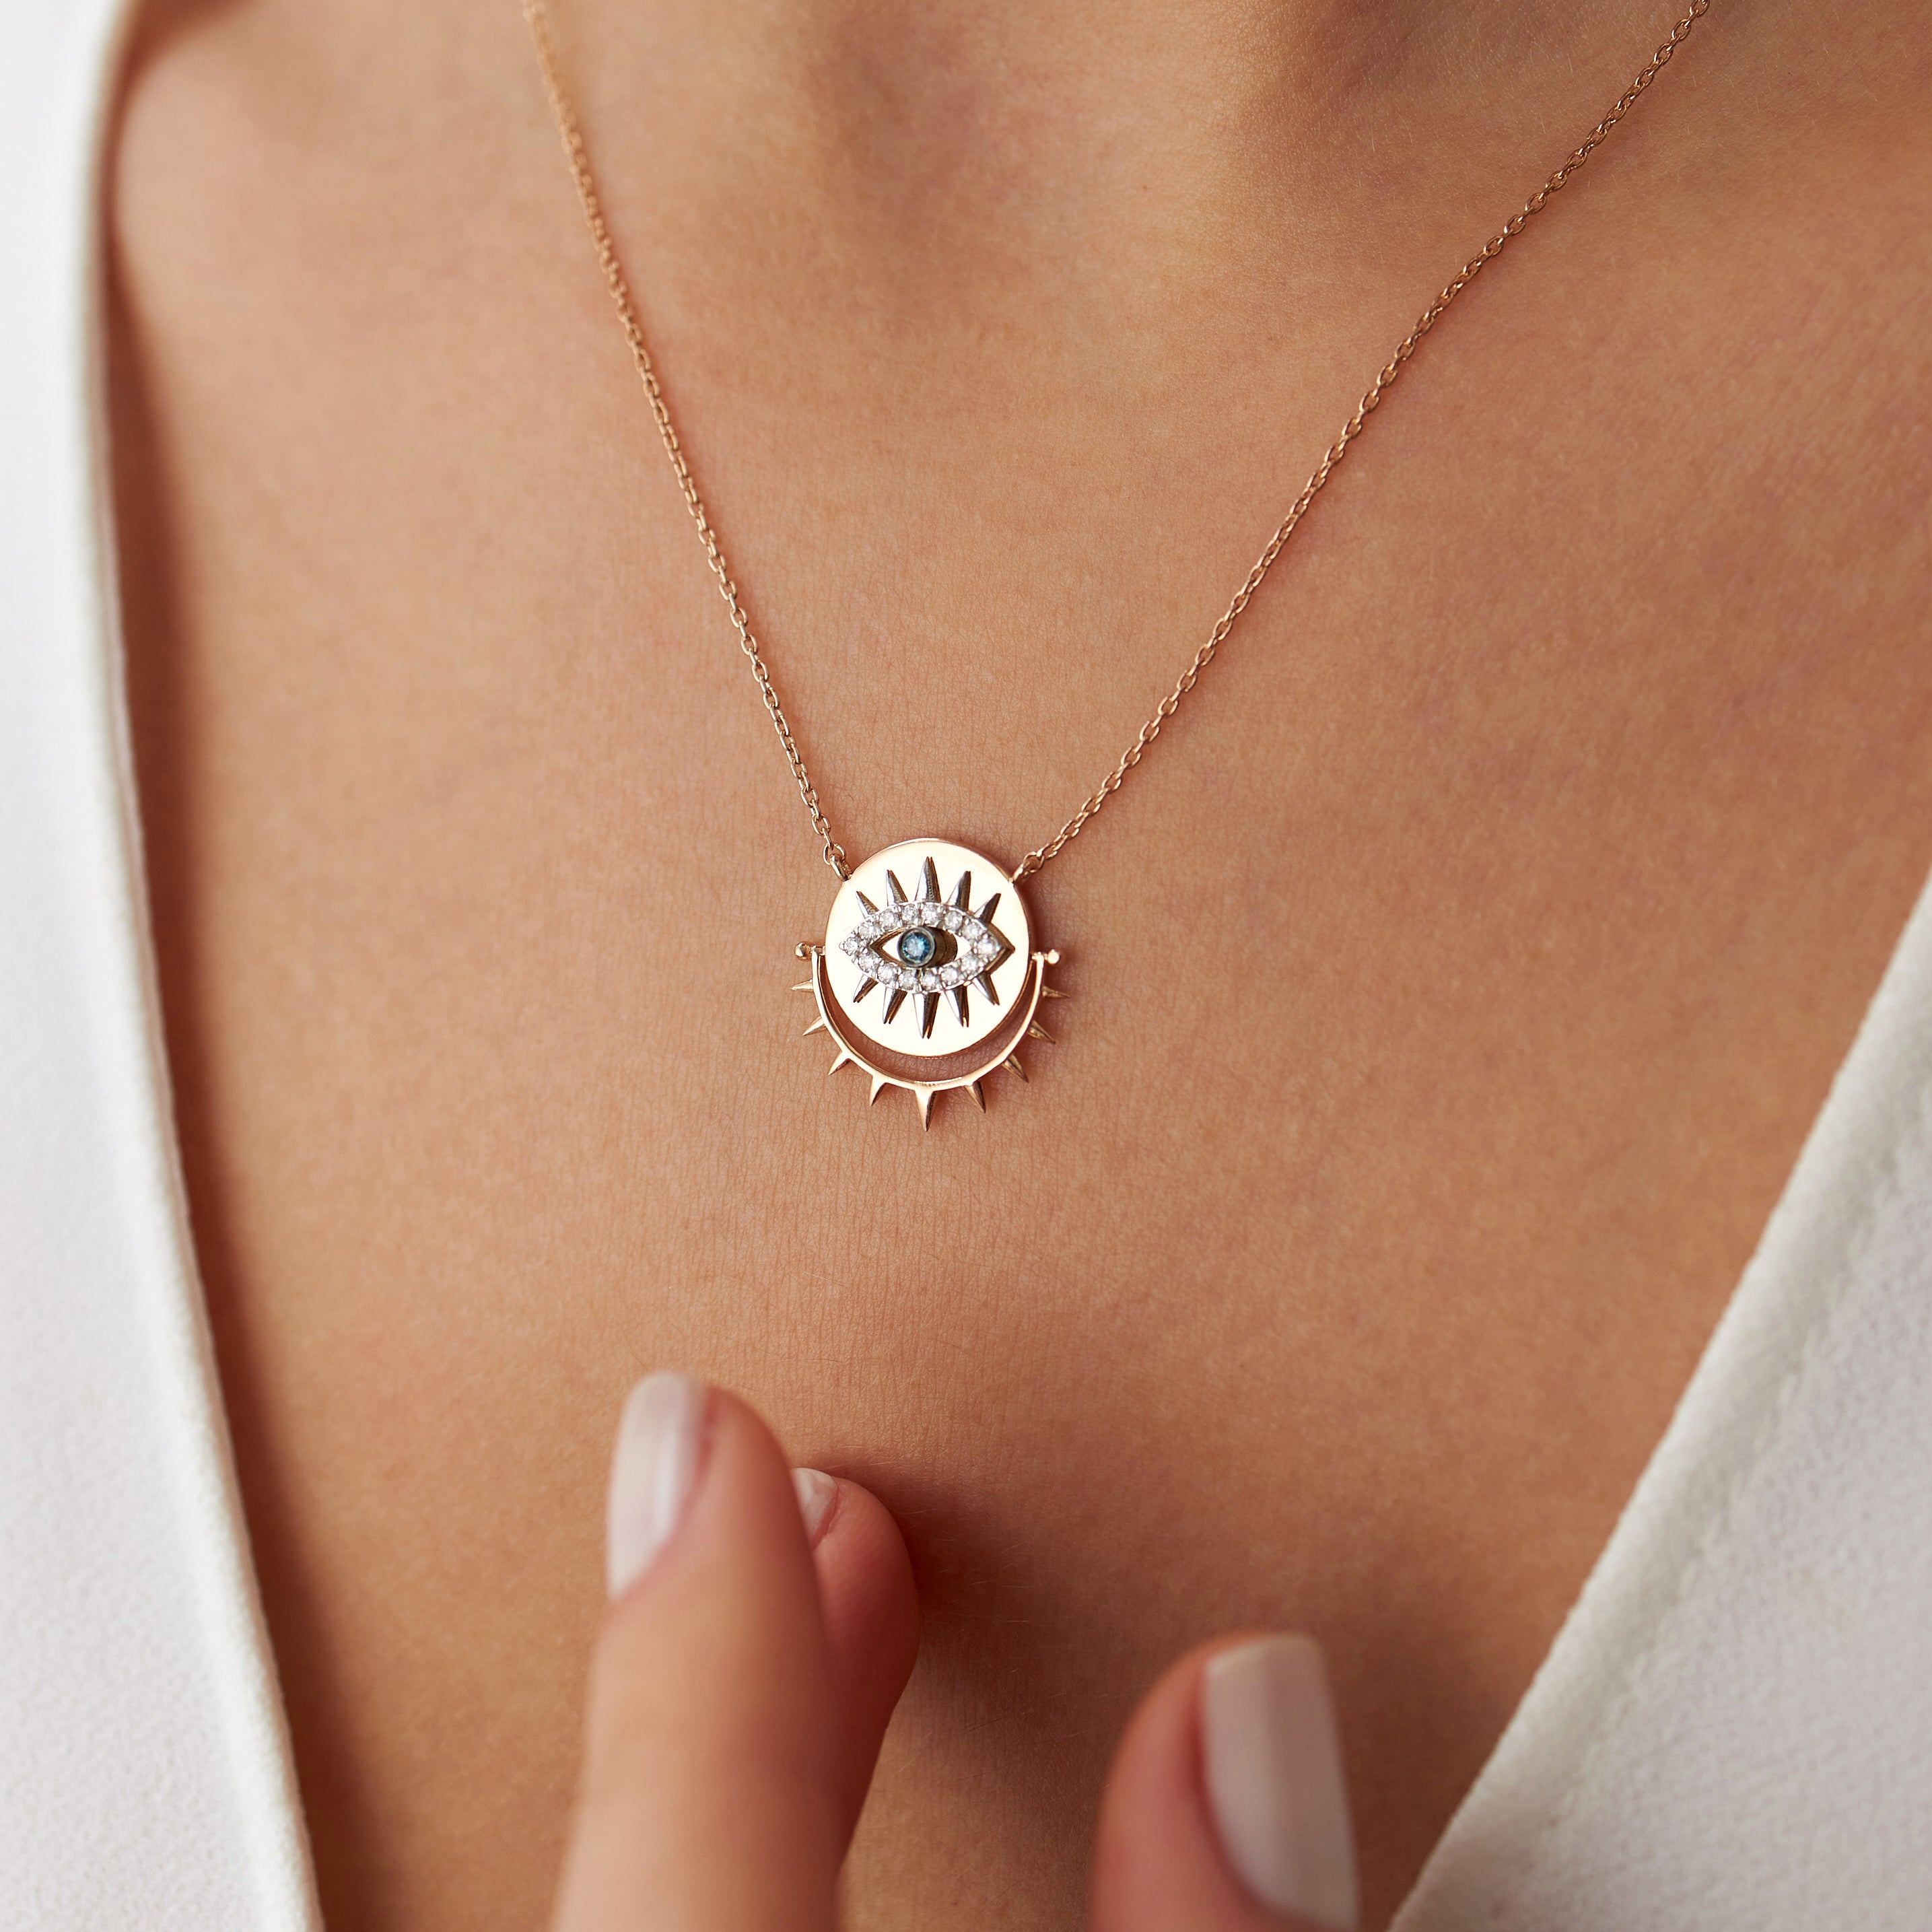 Diamond Spiked Eye Necklace Available in 14K and 18K Gold